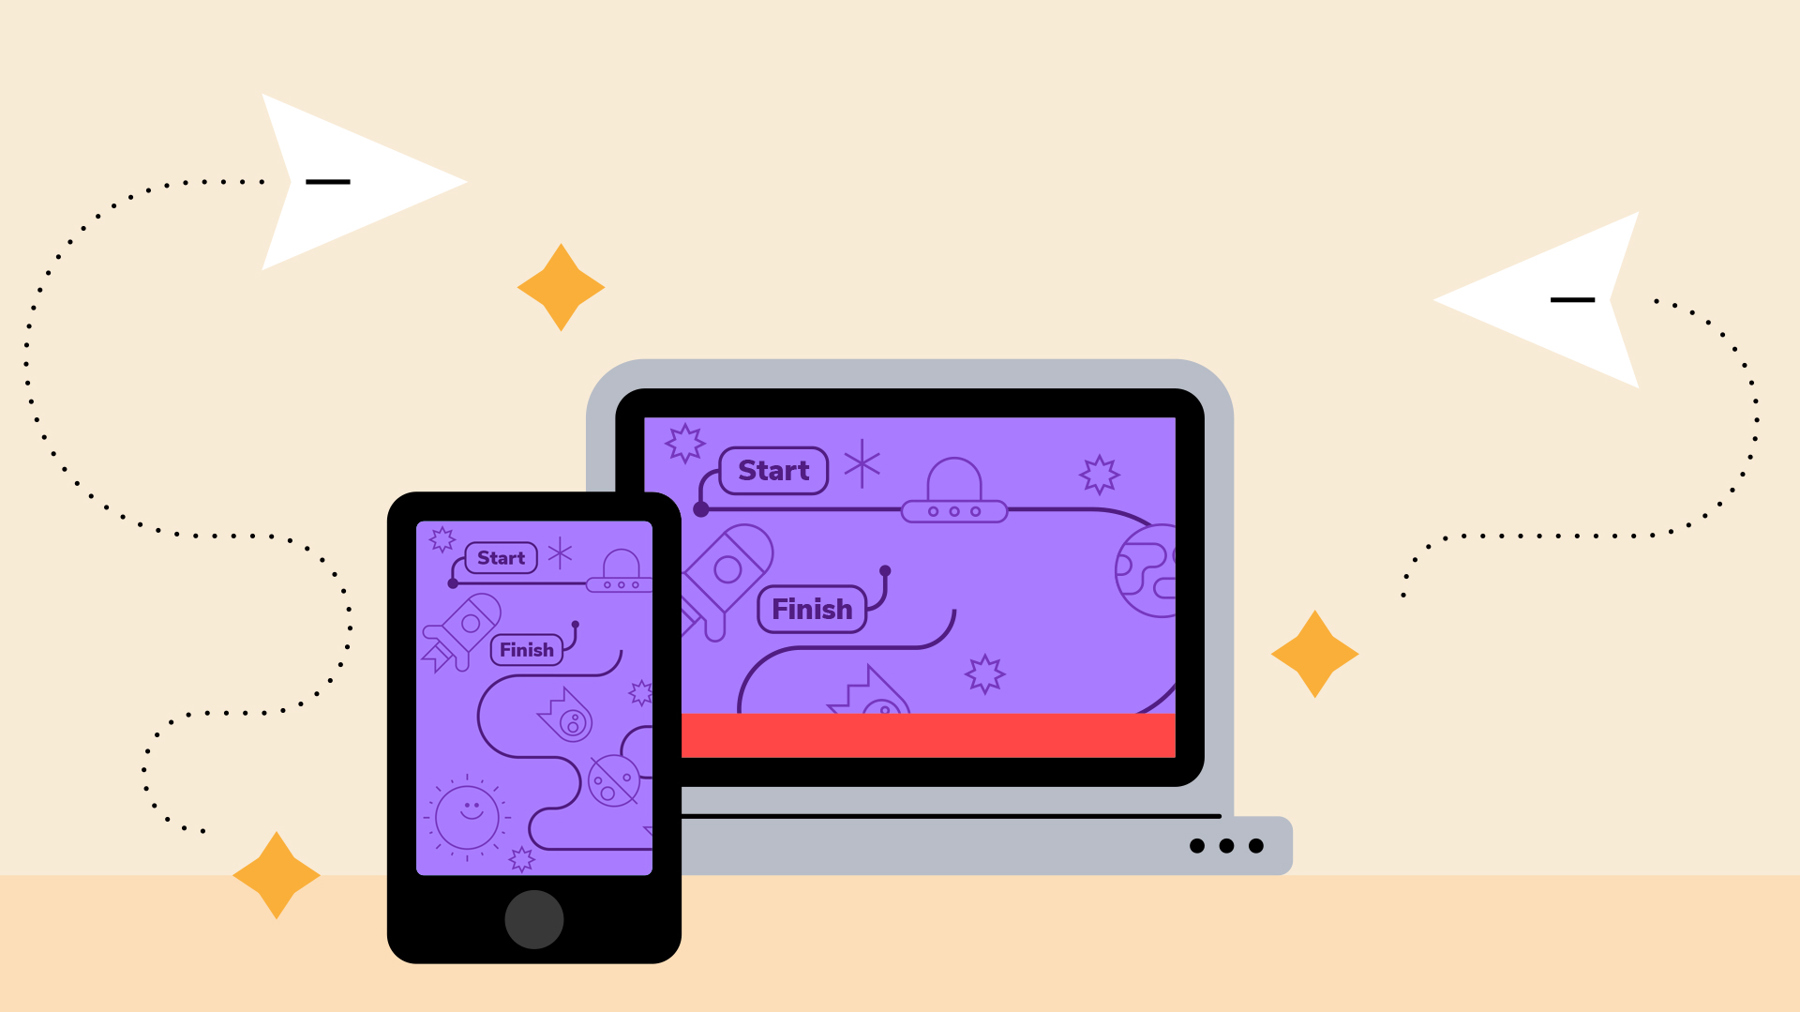 A phone is balanced against a laptop, both have purple maps decorated with spaceships, planets and stars on their screens.